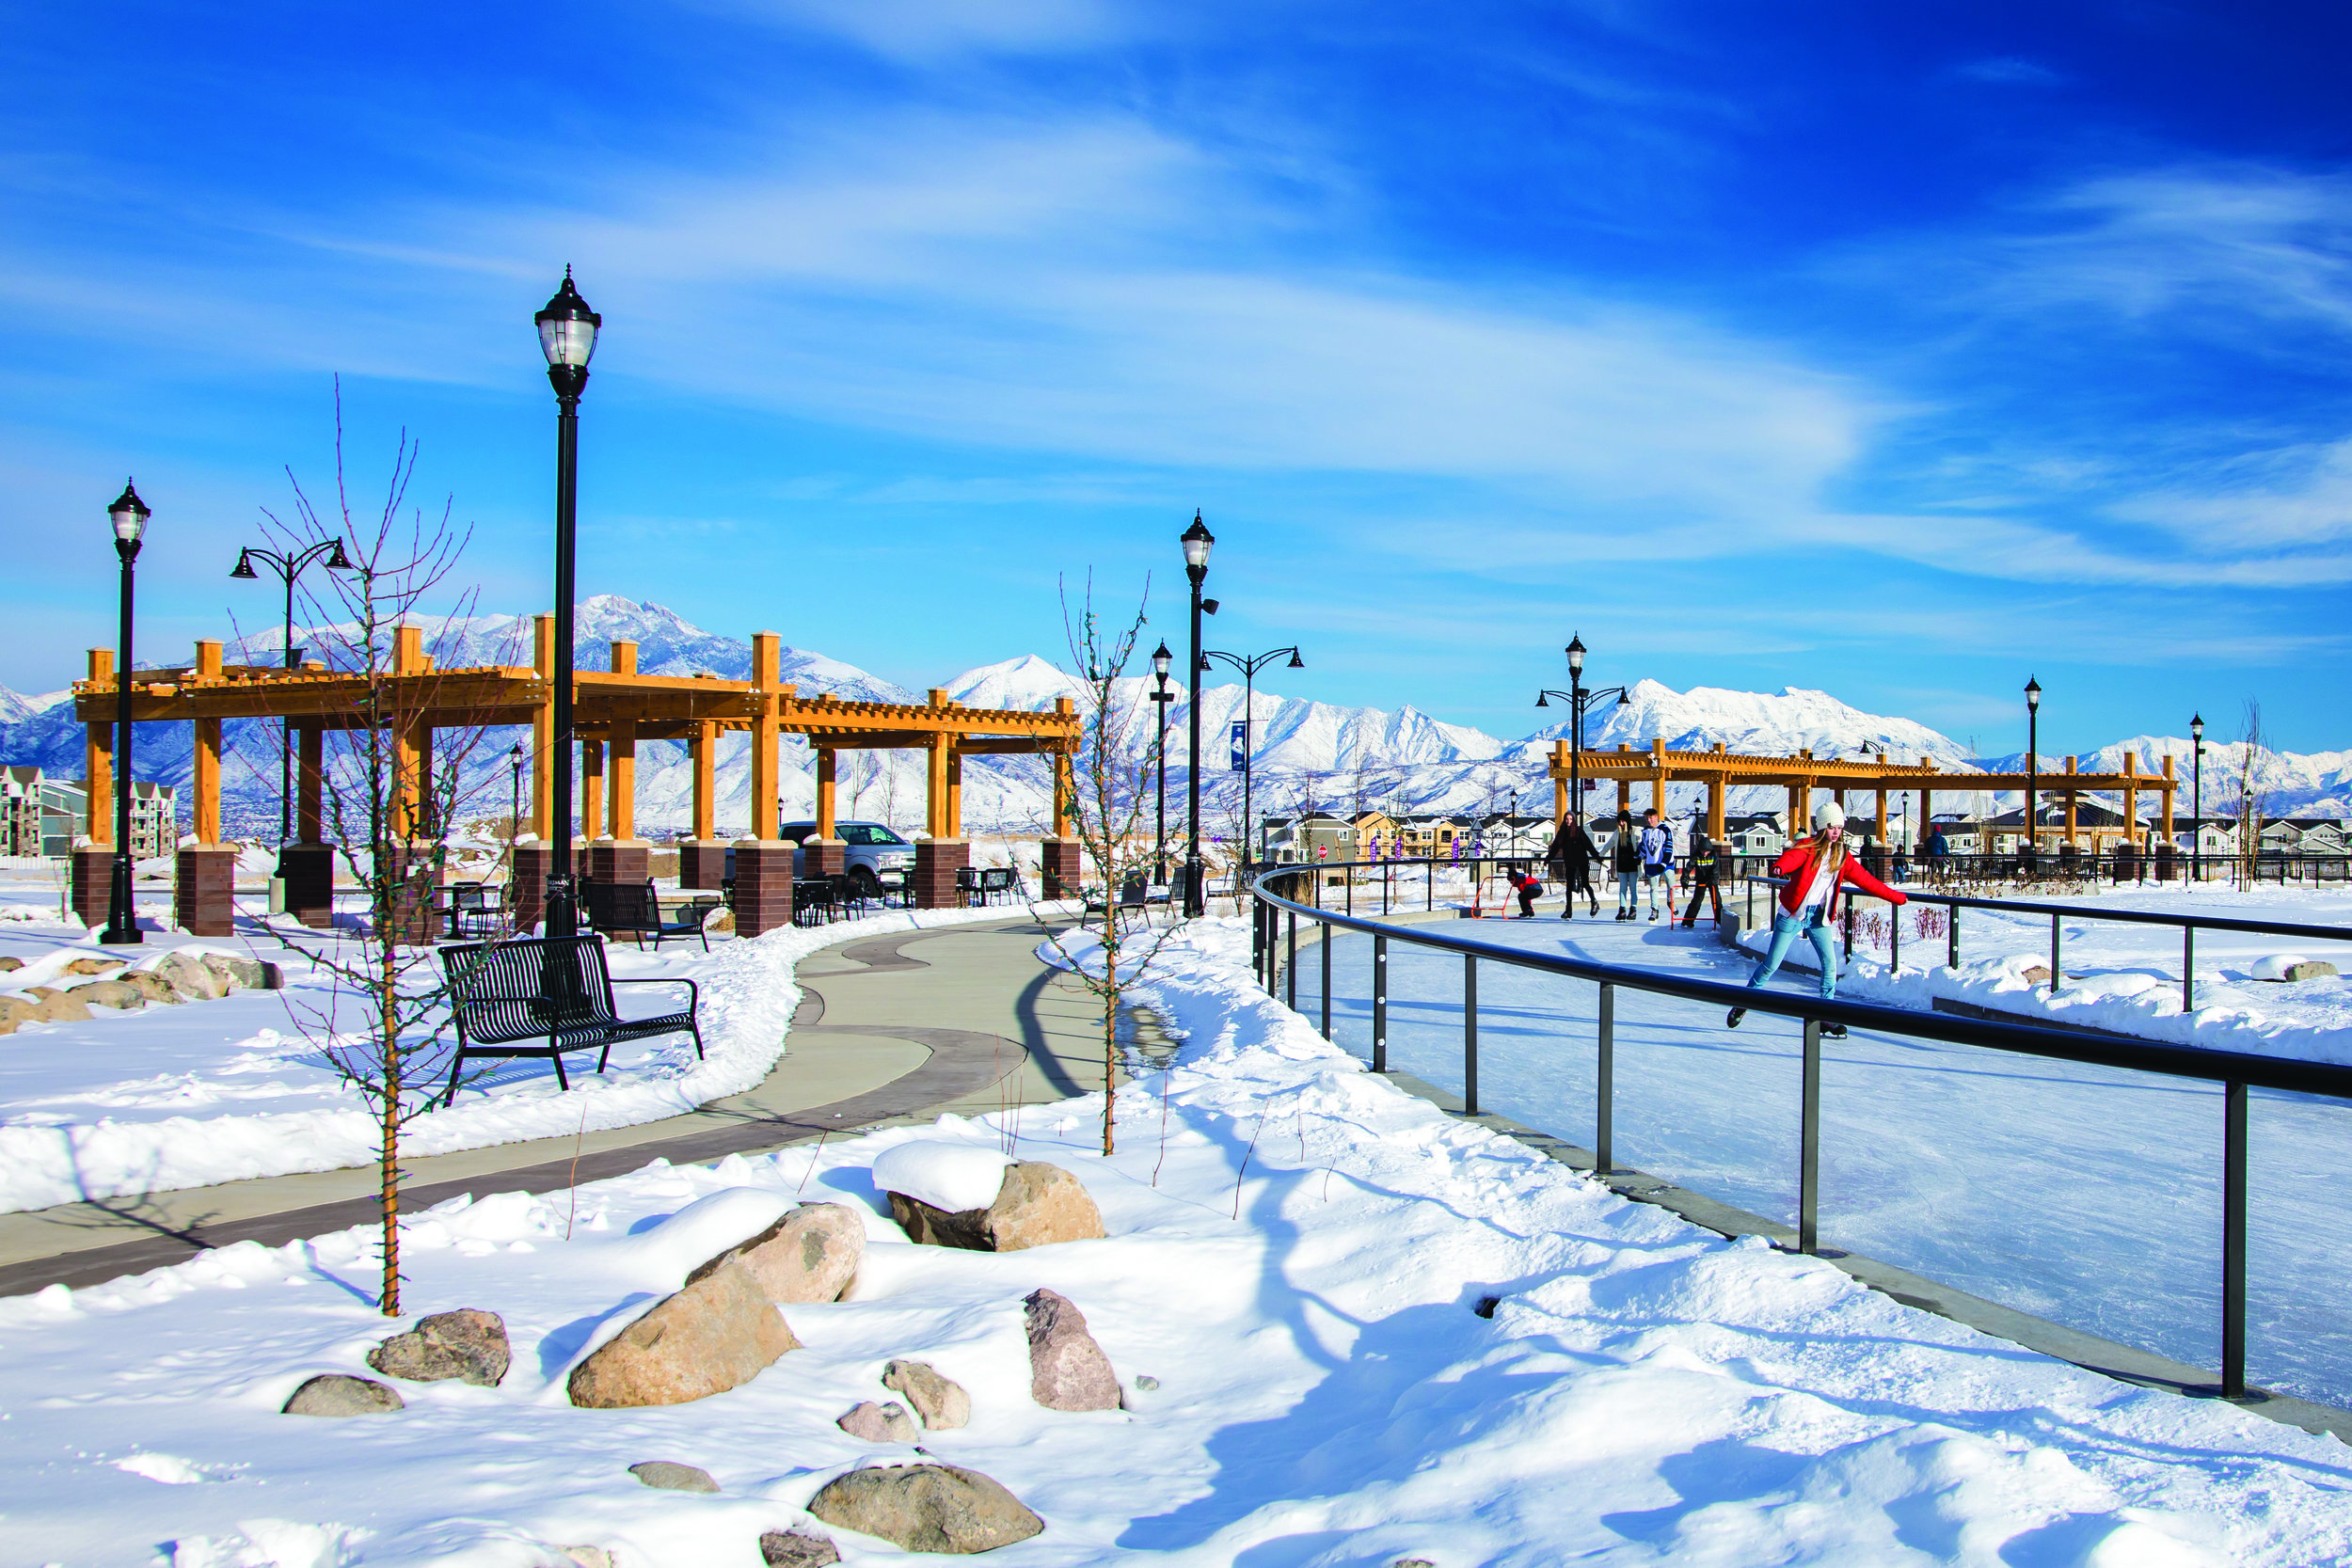  In winter, the Ice Ribbon is a popular skating destination. The Fire and Ice Plaza, not pictured here, offers fire pits and warming stations for skaters to take a break or onlookers to more comfortably observe while they sip their hot chocolate from